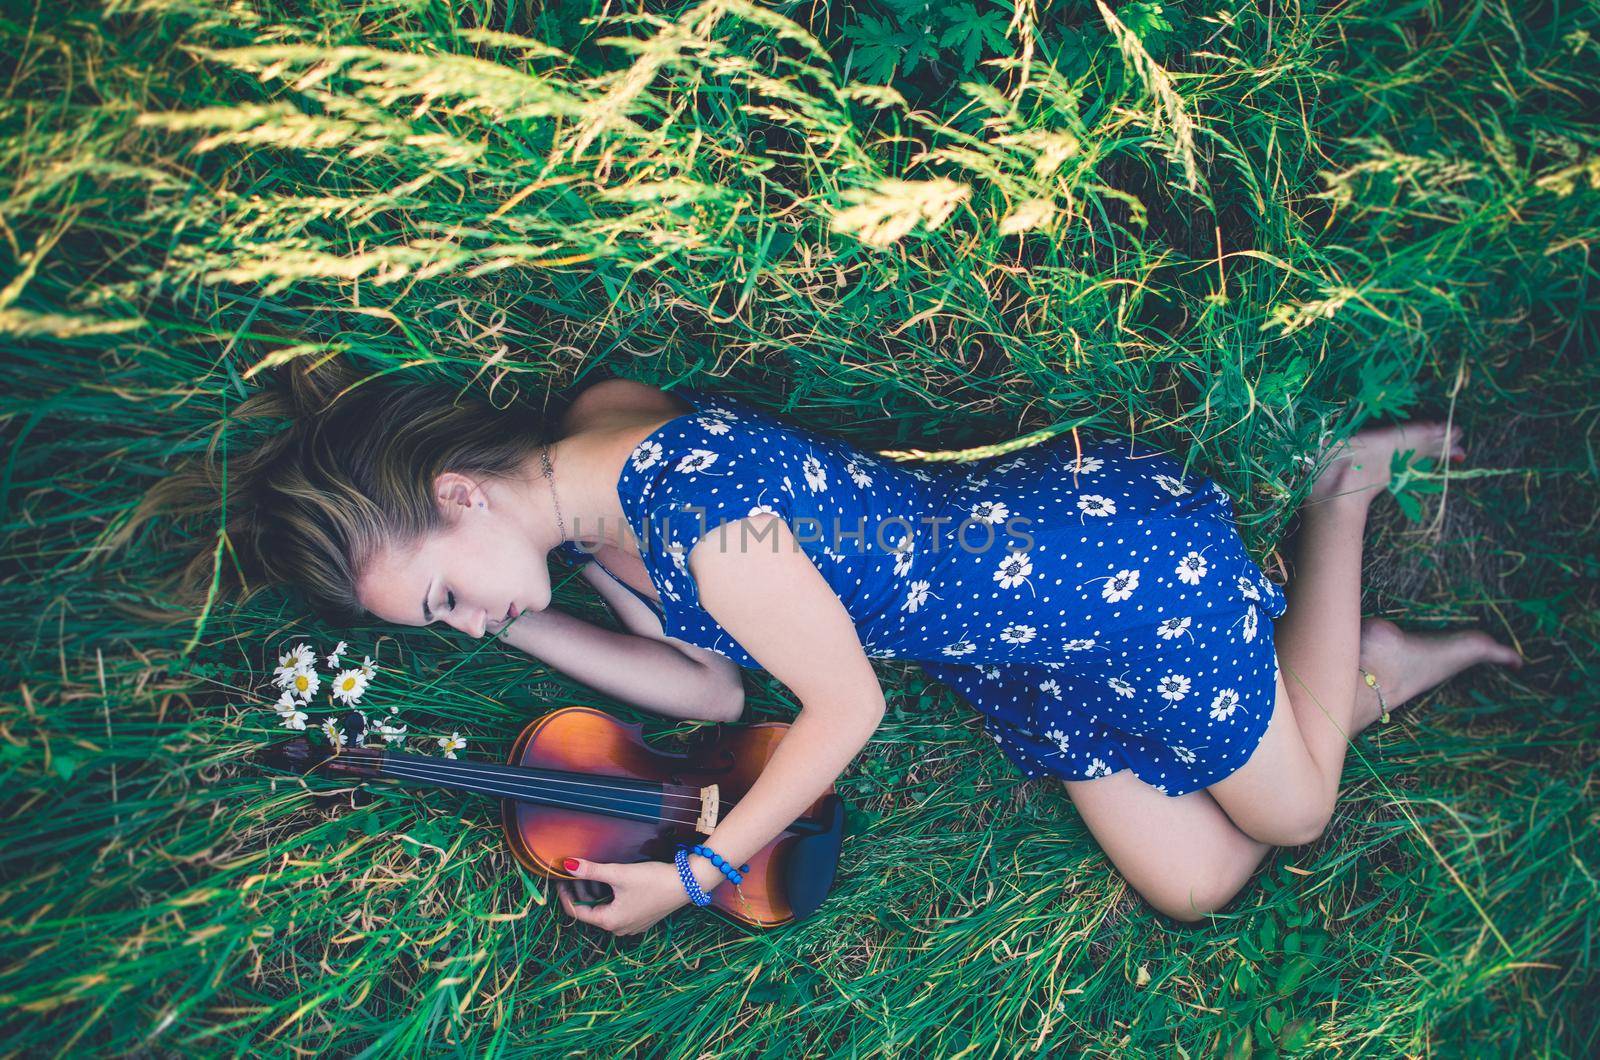 Young slim fair-skinned girl blonde beautiful lies in tall grass. Top view. Girl in a blue short tight dress with a print of daisies. A bouquet and lonely daisies scattered around.A woman hugs violin.